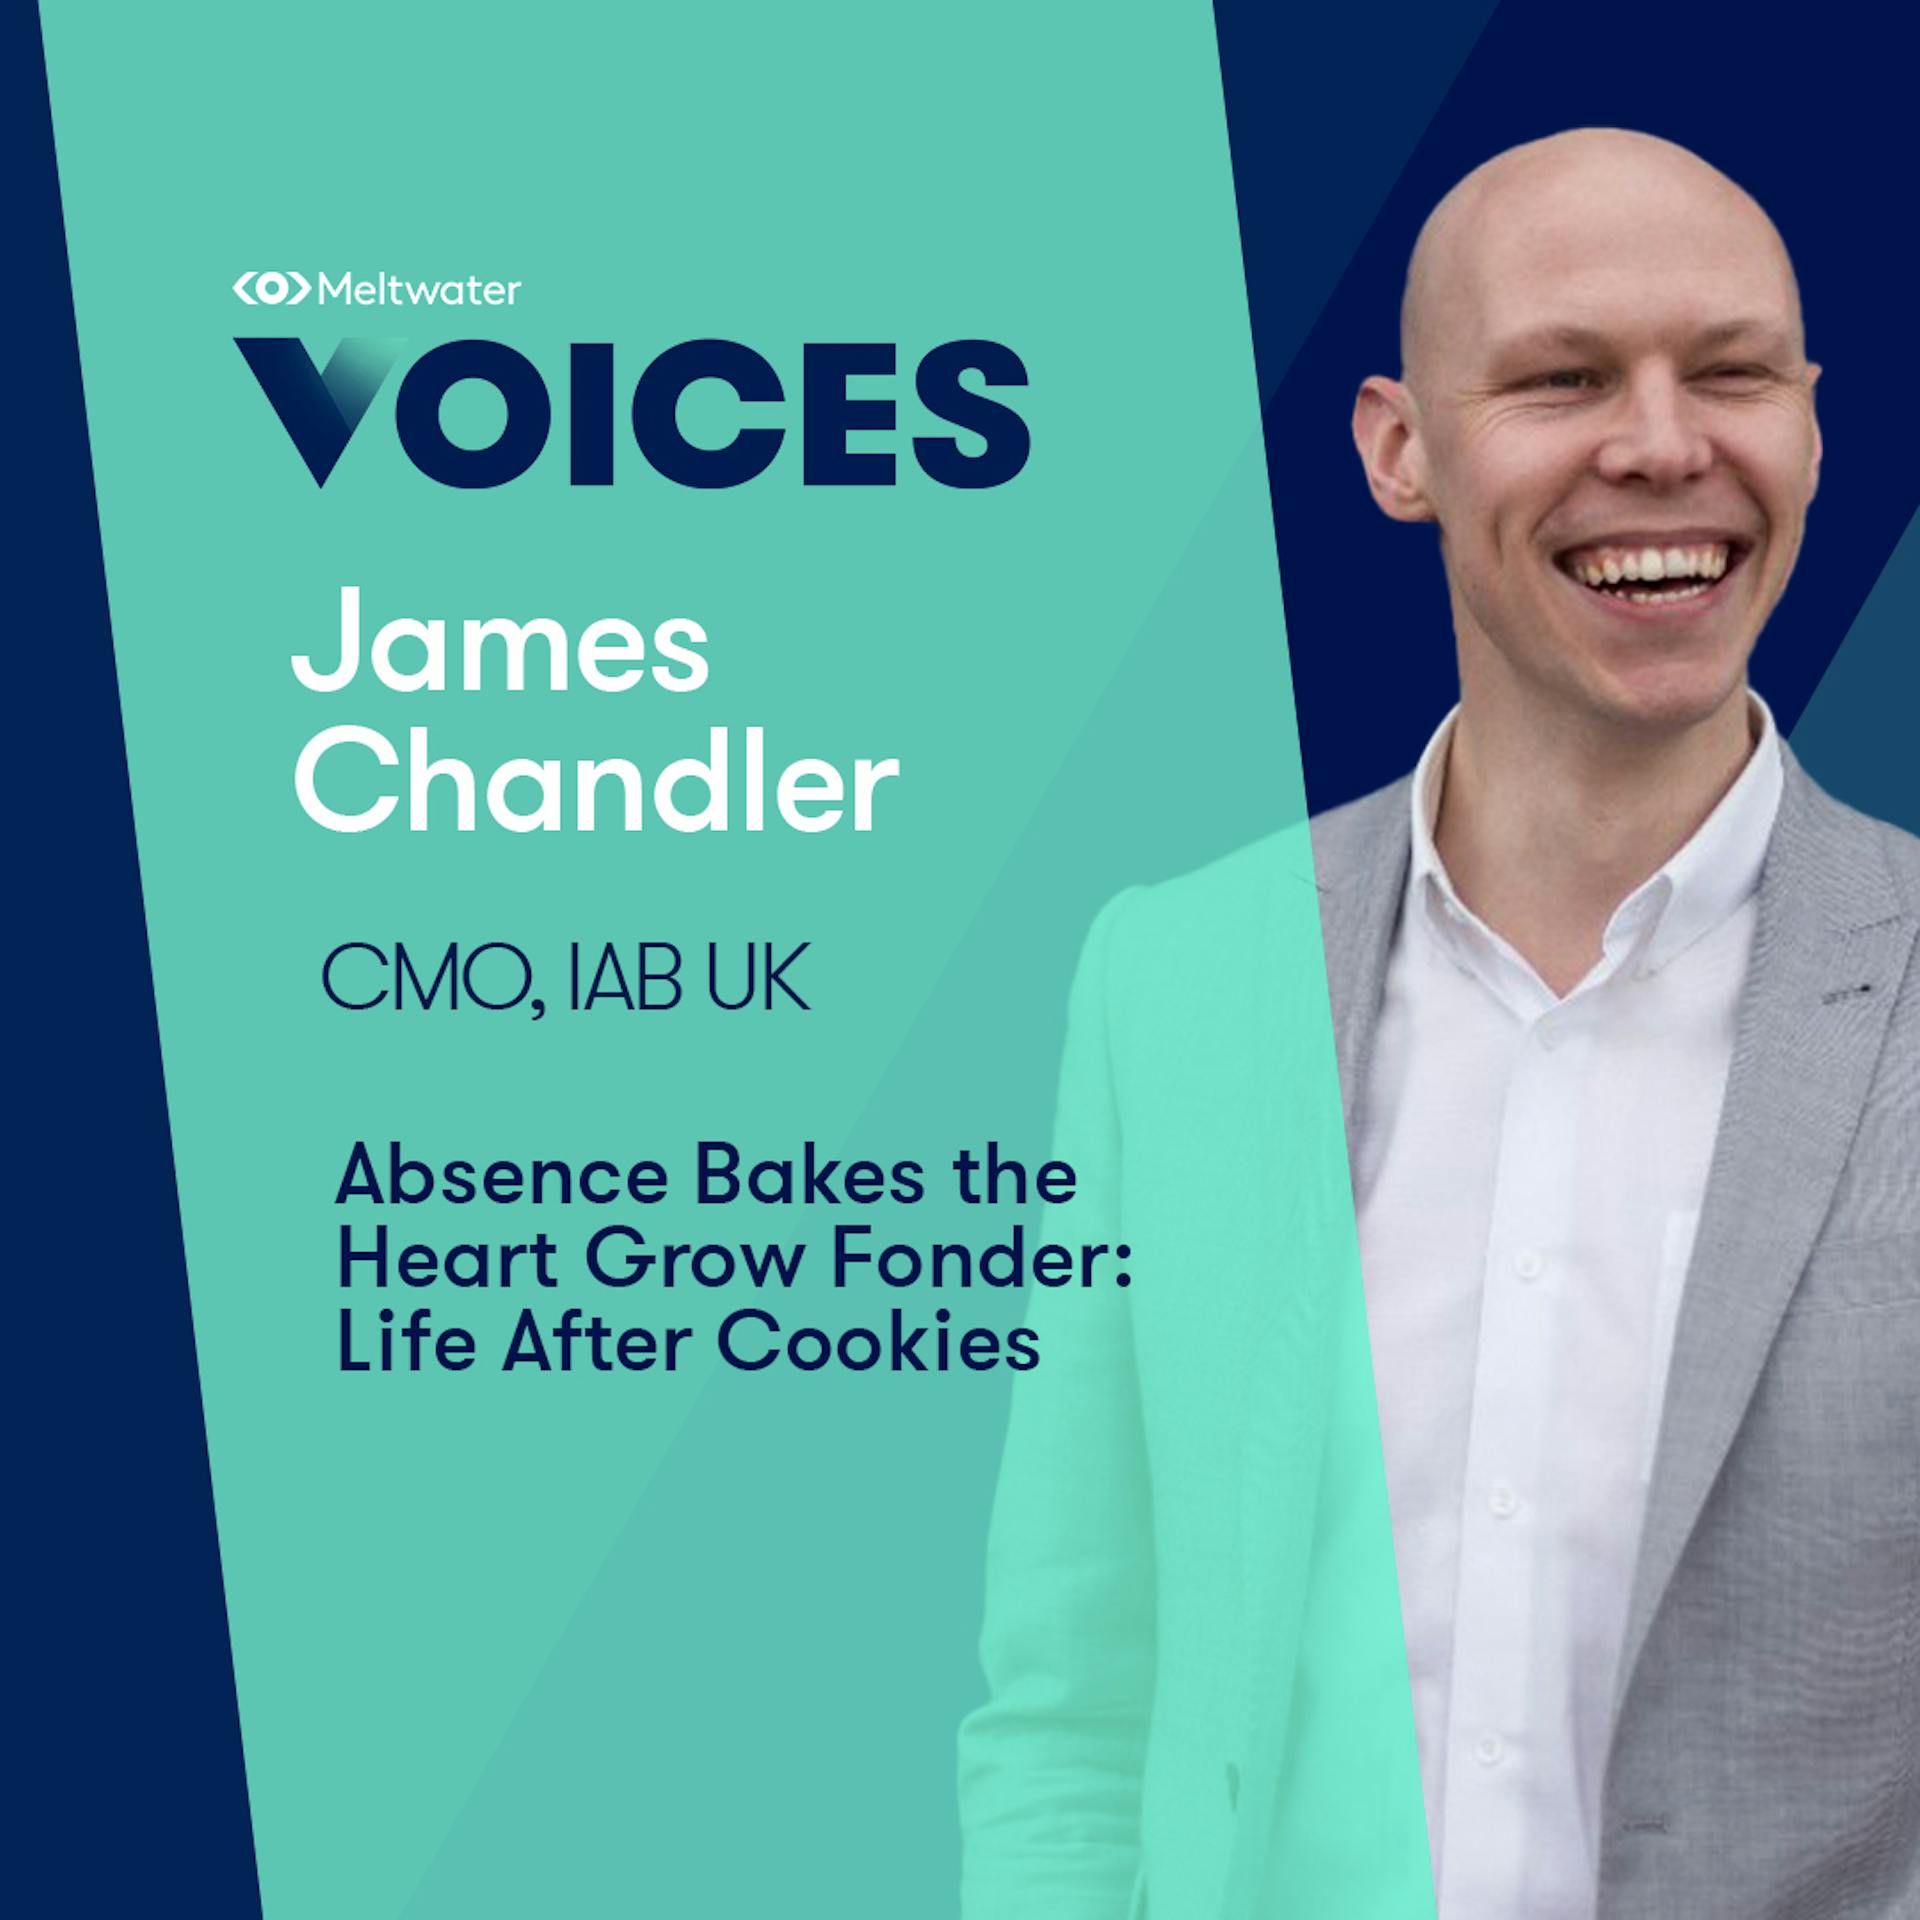 Meltwater Voices - Digital Transformation in Communications and Marketing - James Chandler